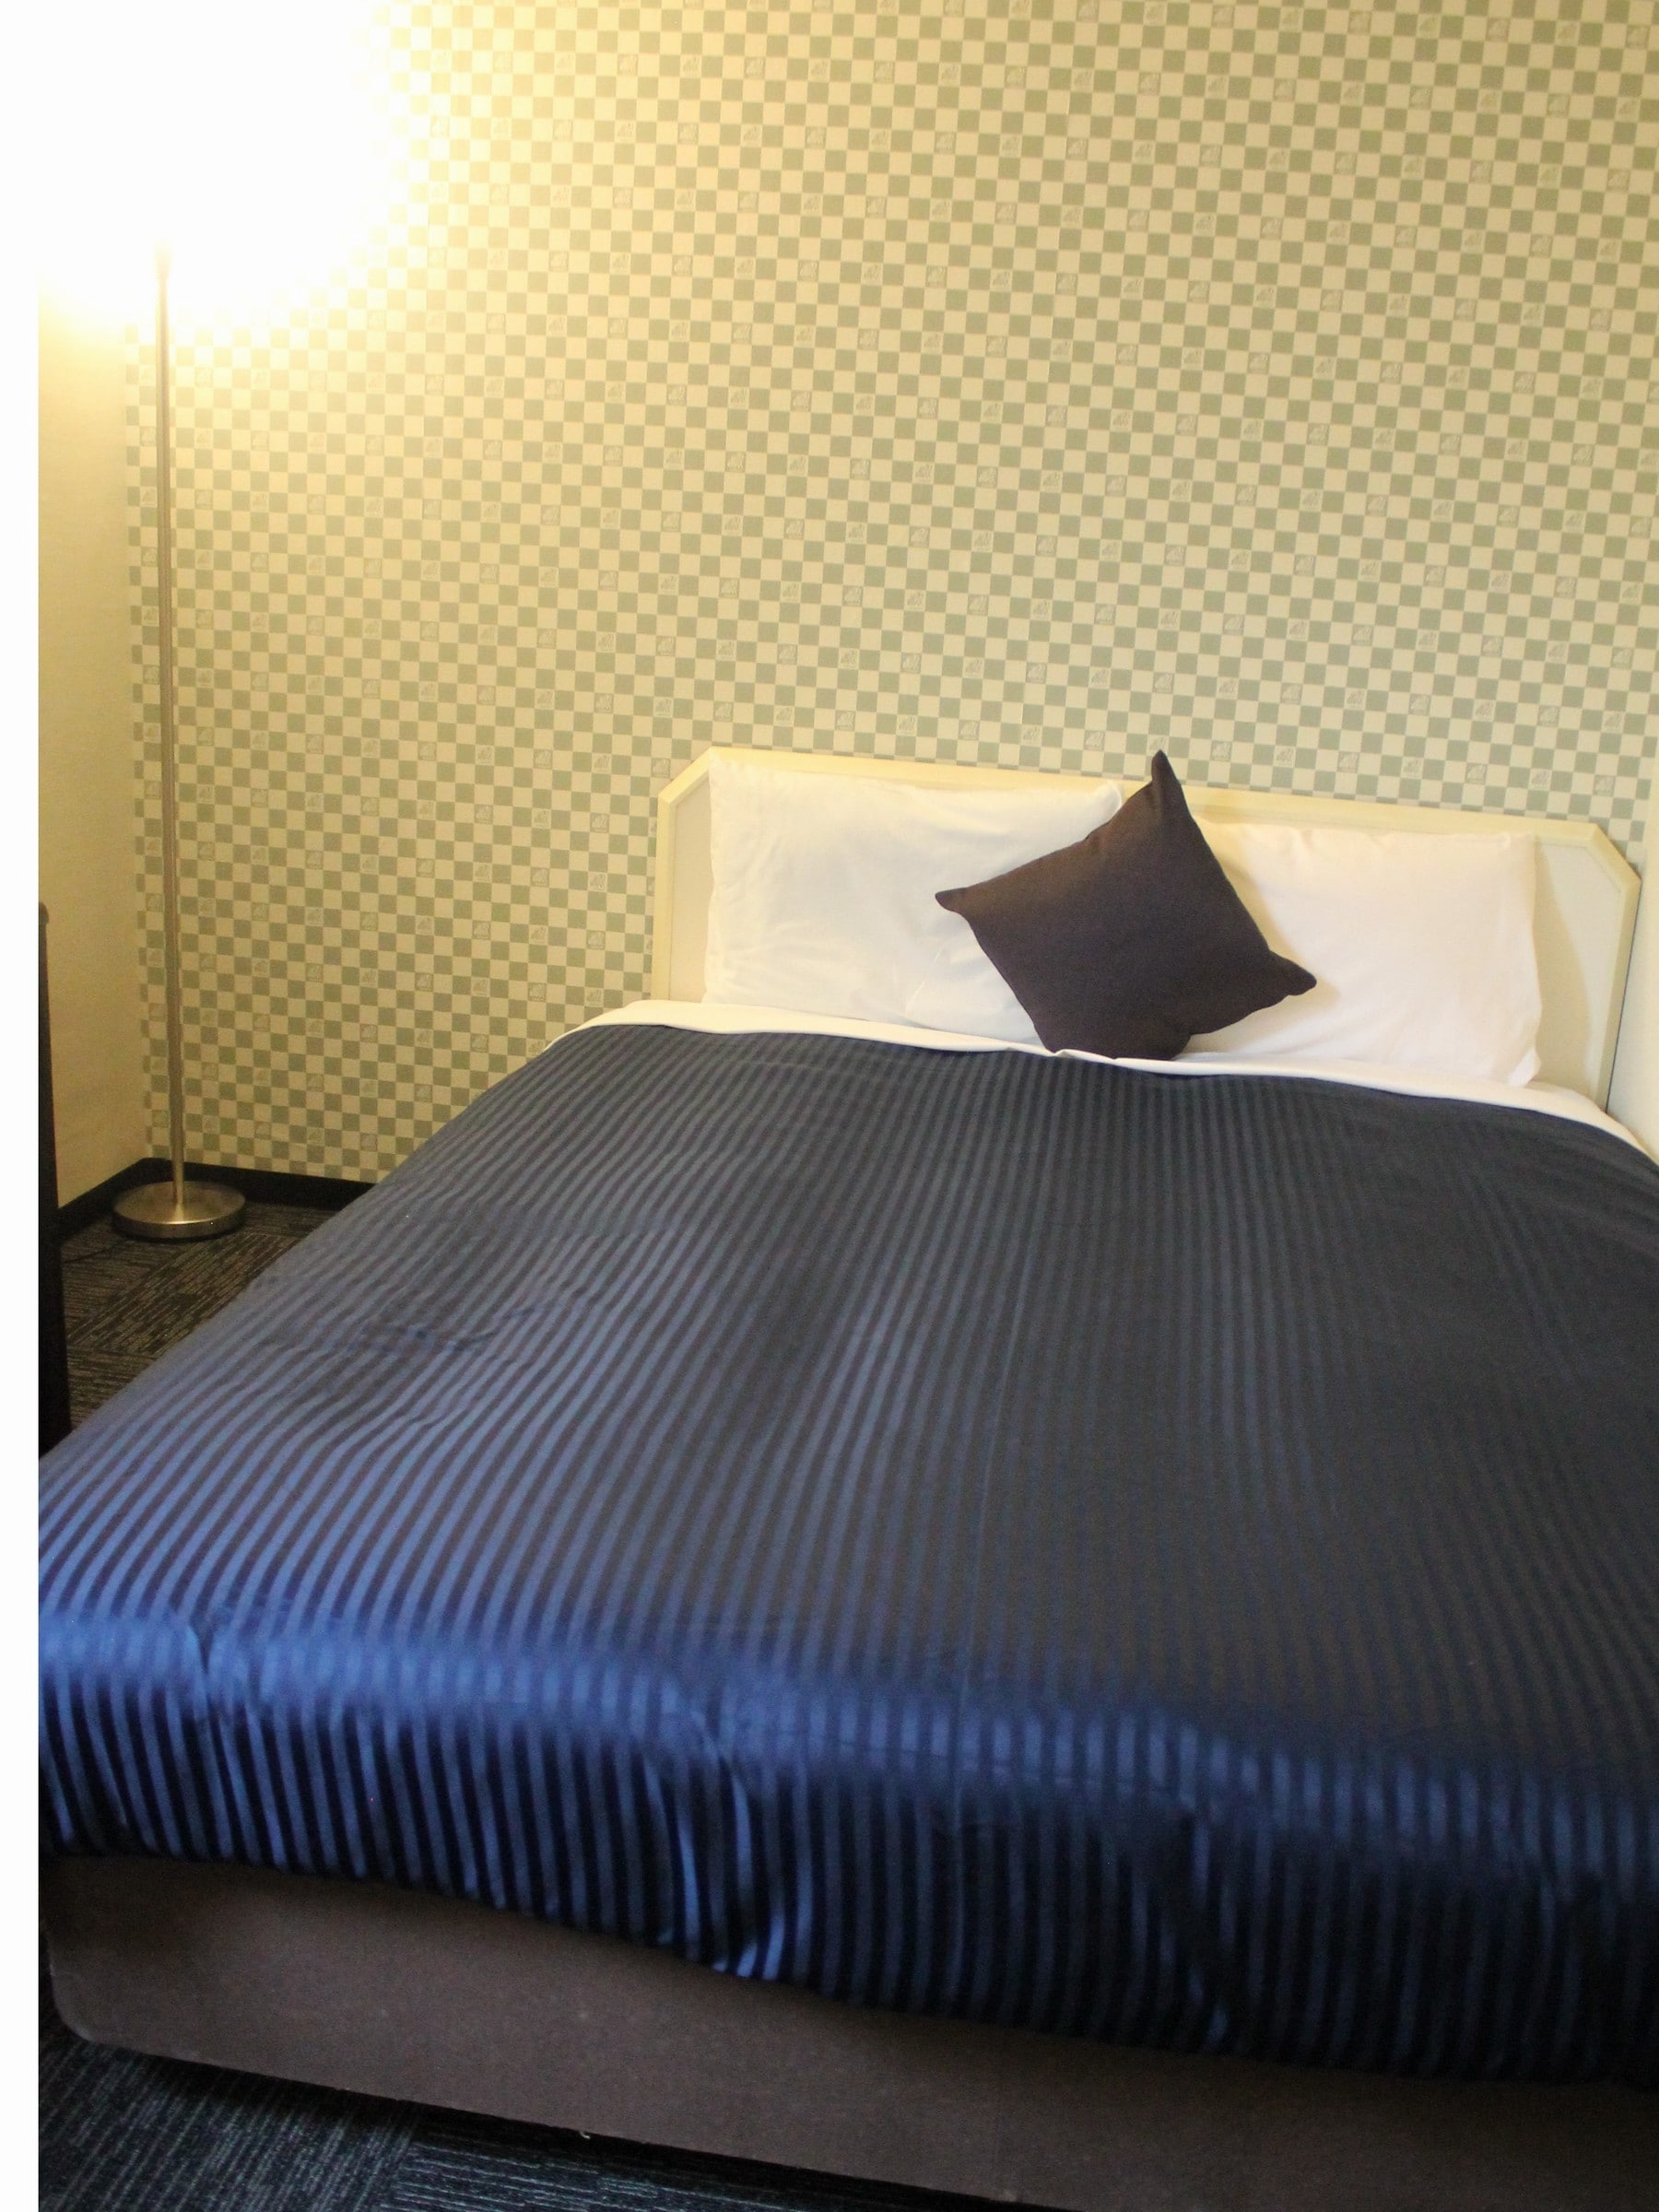 Single room ☆ The bed is 140 cm wide! (* Sleeping with 2 people on 1 bed)